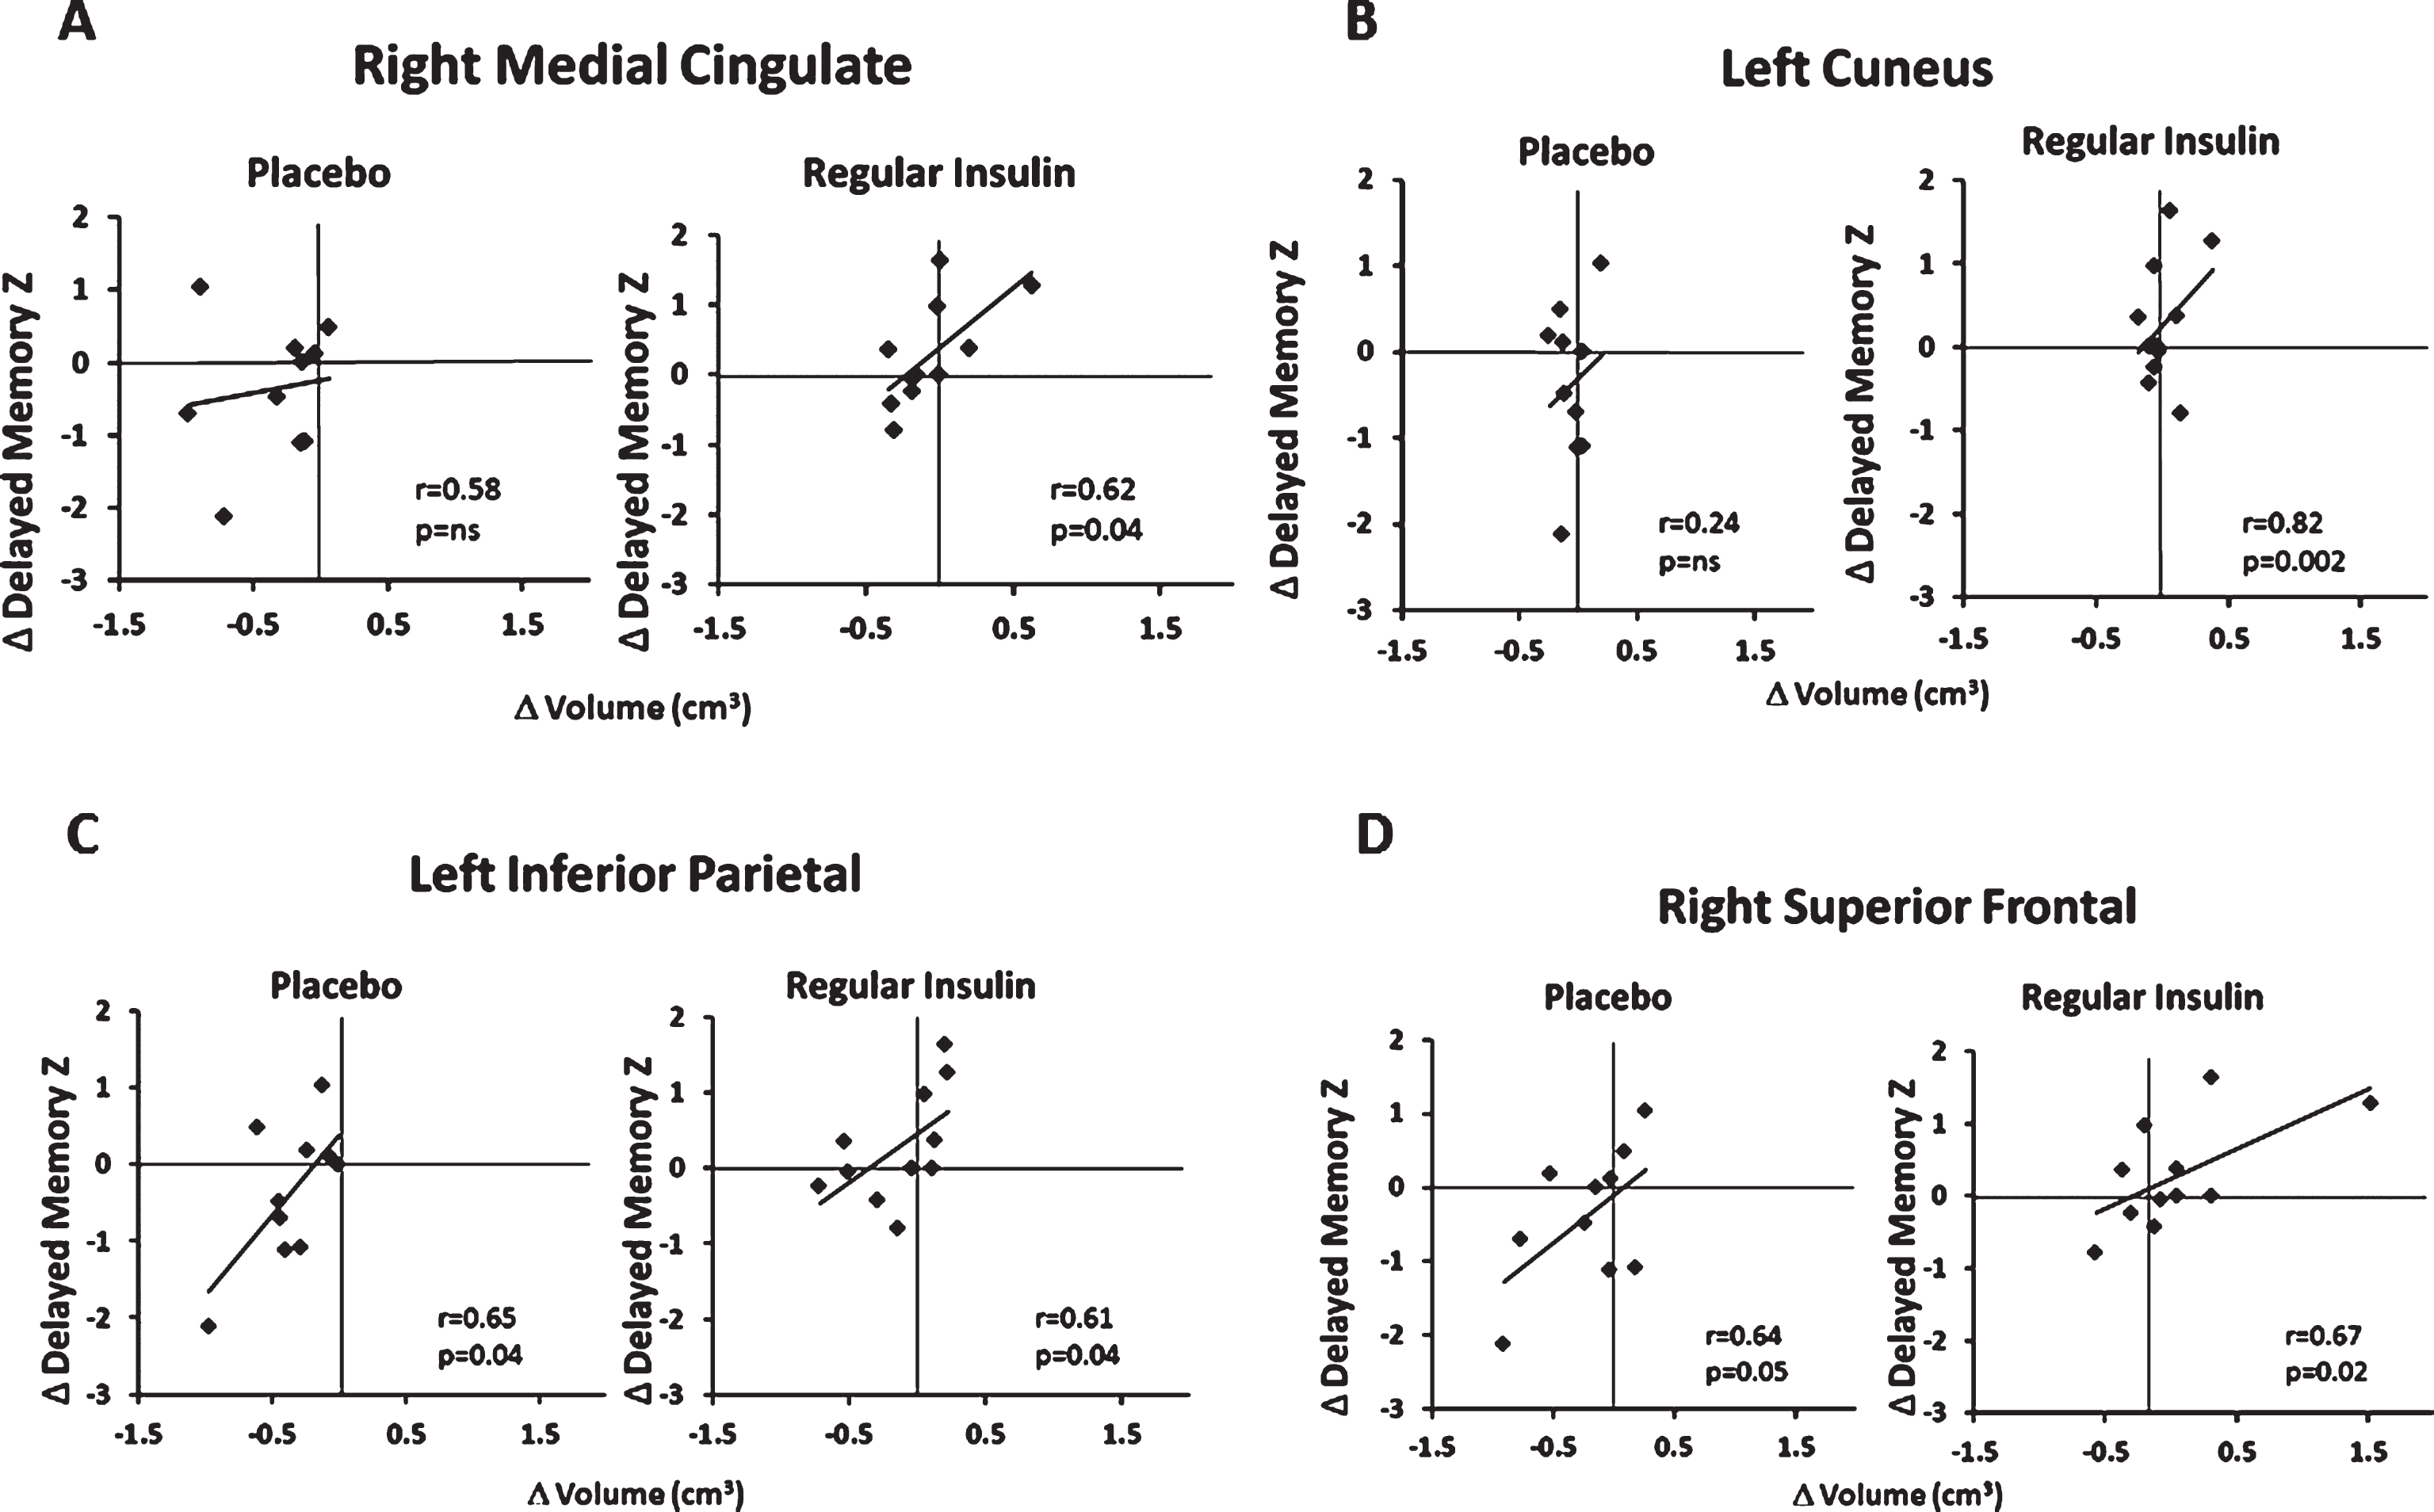 Representative relationships between changes in MRI volume and cognitive outcomes. For regular insulin-treated participants, improved memory composite Z scores were associated with increased volume for (A) right middle cingulum (r = 0.62, p < 0.05), (B) left cuneus (r = 0.82, p < 0.01), (C) left inferior parietal (r = 0.61, p < 0.04) and (D) right superior frontal (r = 0.67, p < 0.03). For the placebo group, participants who had less volume loss in (C) left inferior parietal or (D) right superior frontal cortex showed less memory decline (rs = 0.65 and 0.64, ps < 0.05). No relationships between ROI volumes and memory were observed for the detemir-treated group.